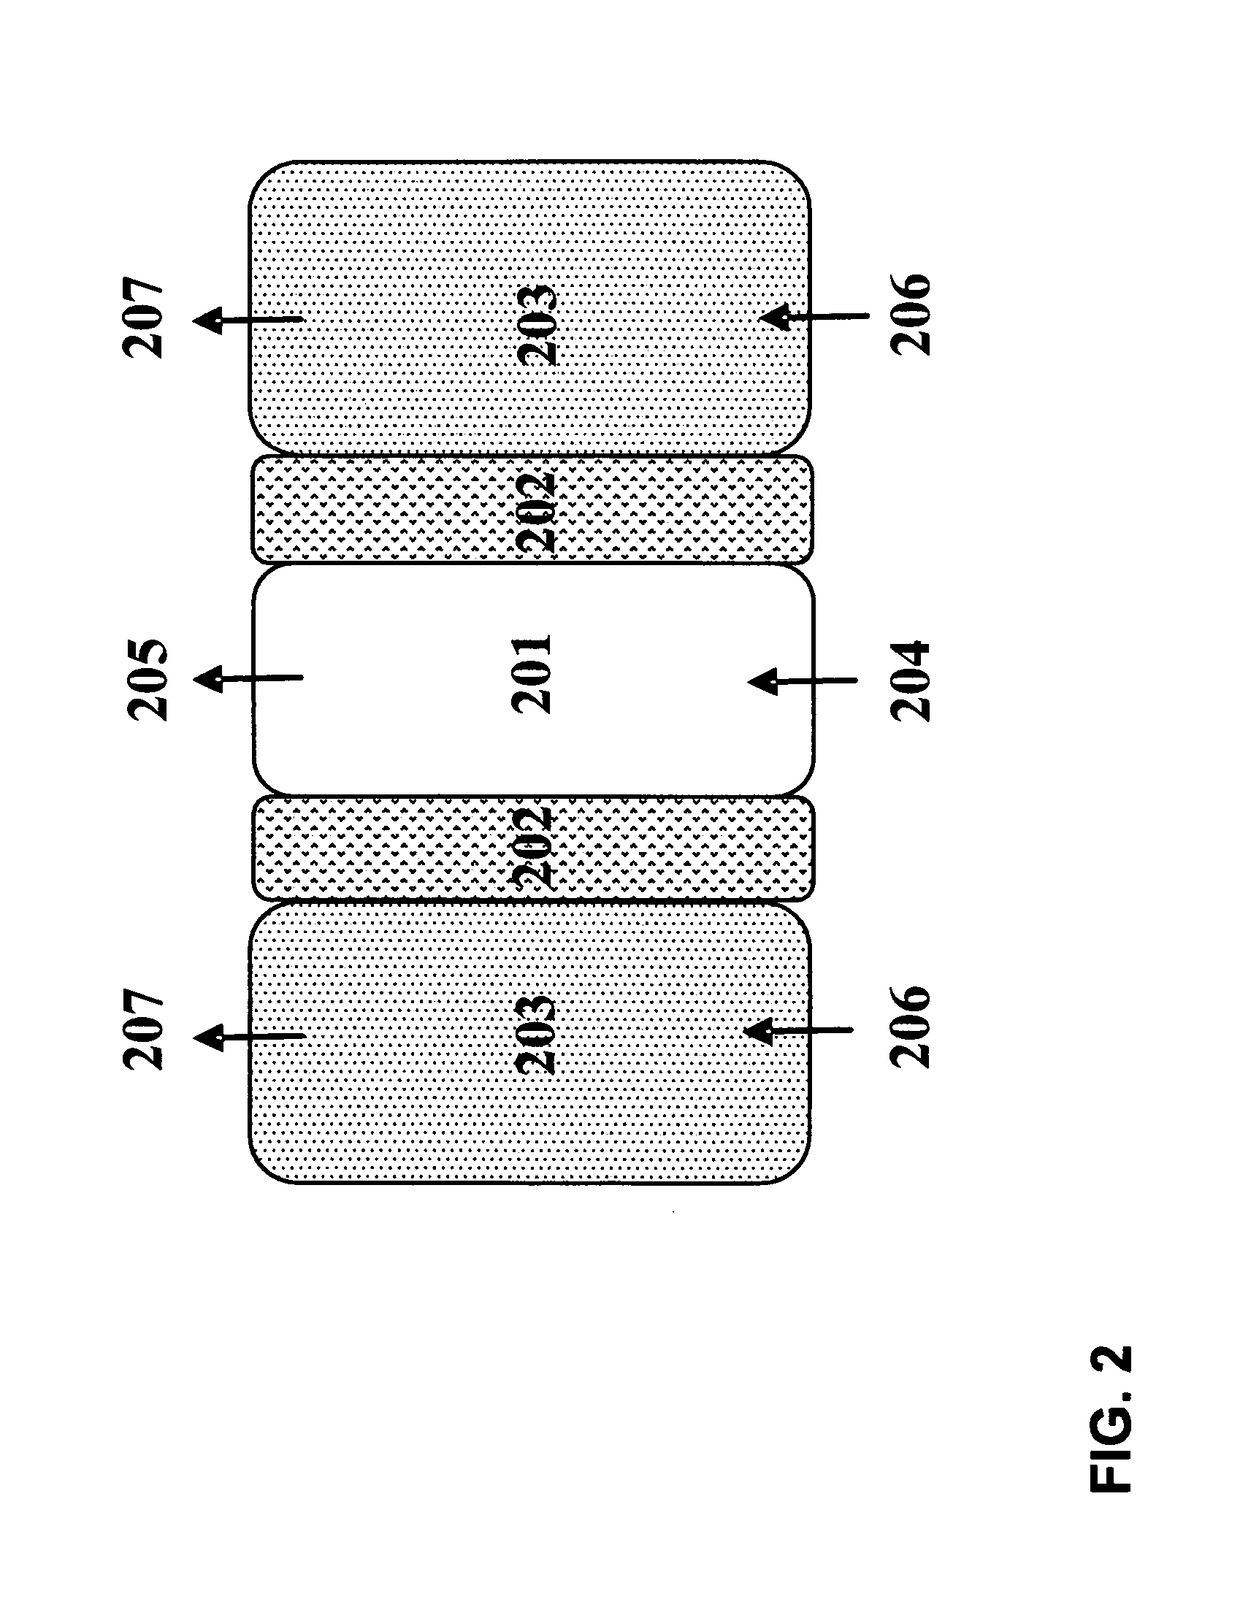 Apparatus and process for efficient production of liquid fuels from gaseous hydrocarbons